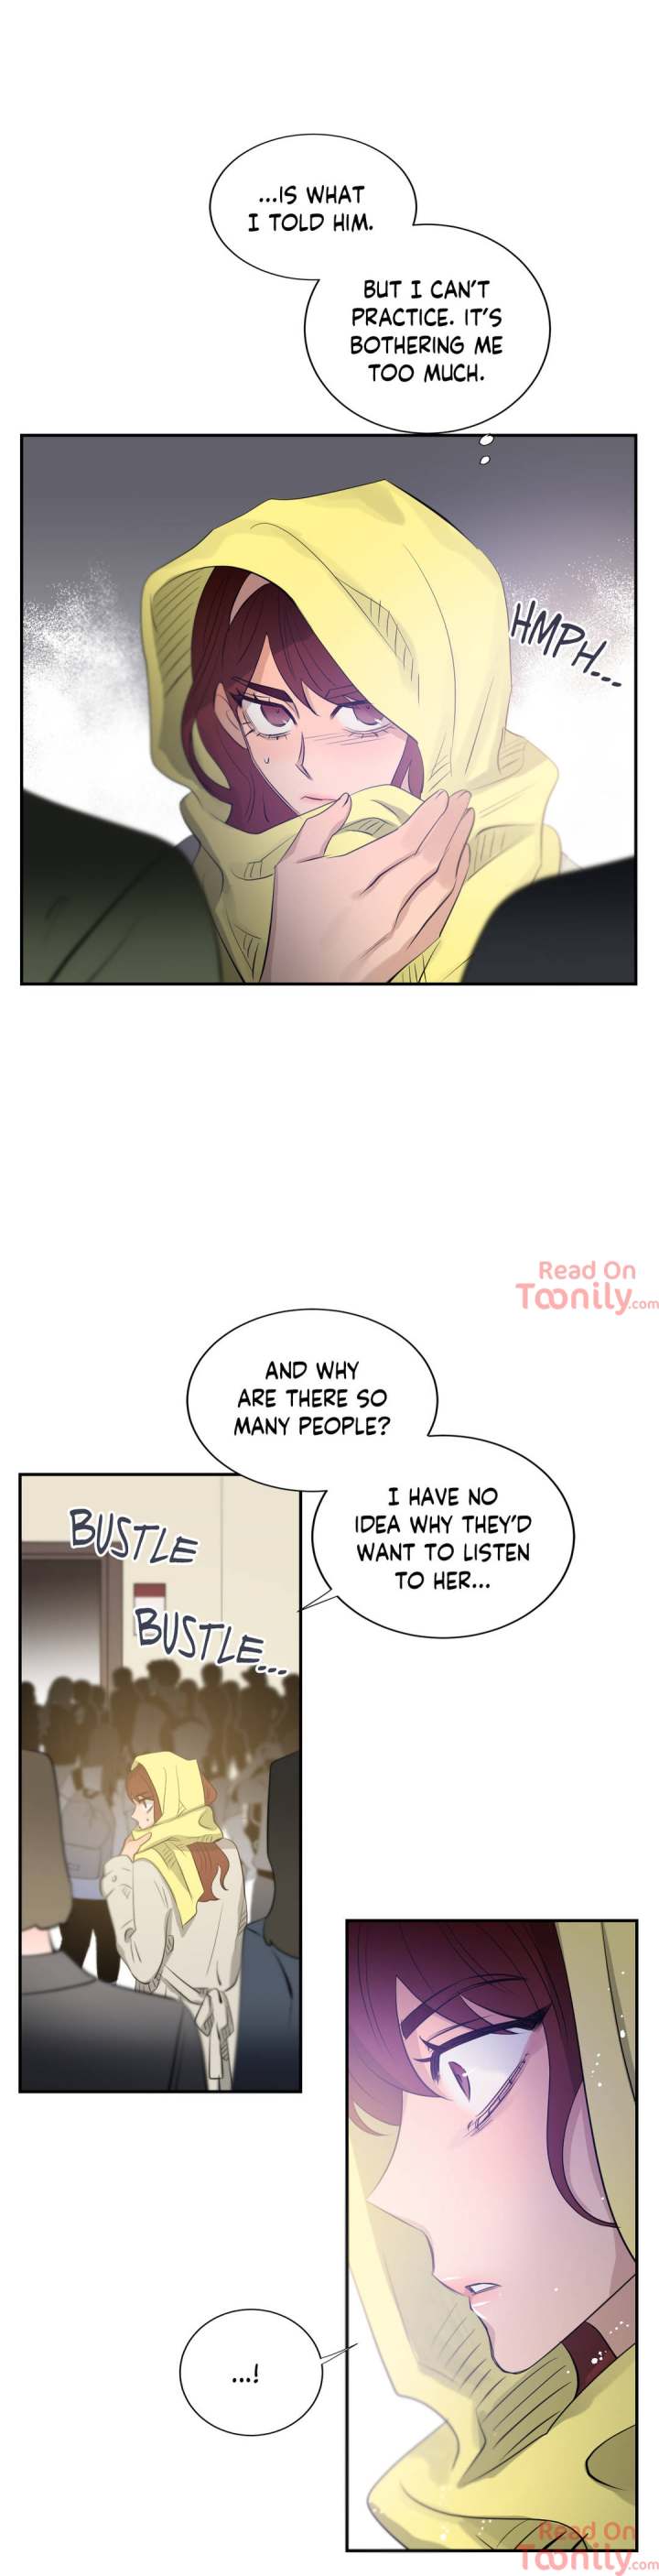 Broken Melody - Chapter 79 Page 4